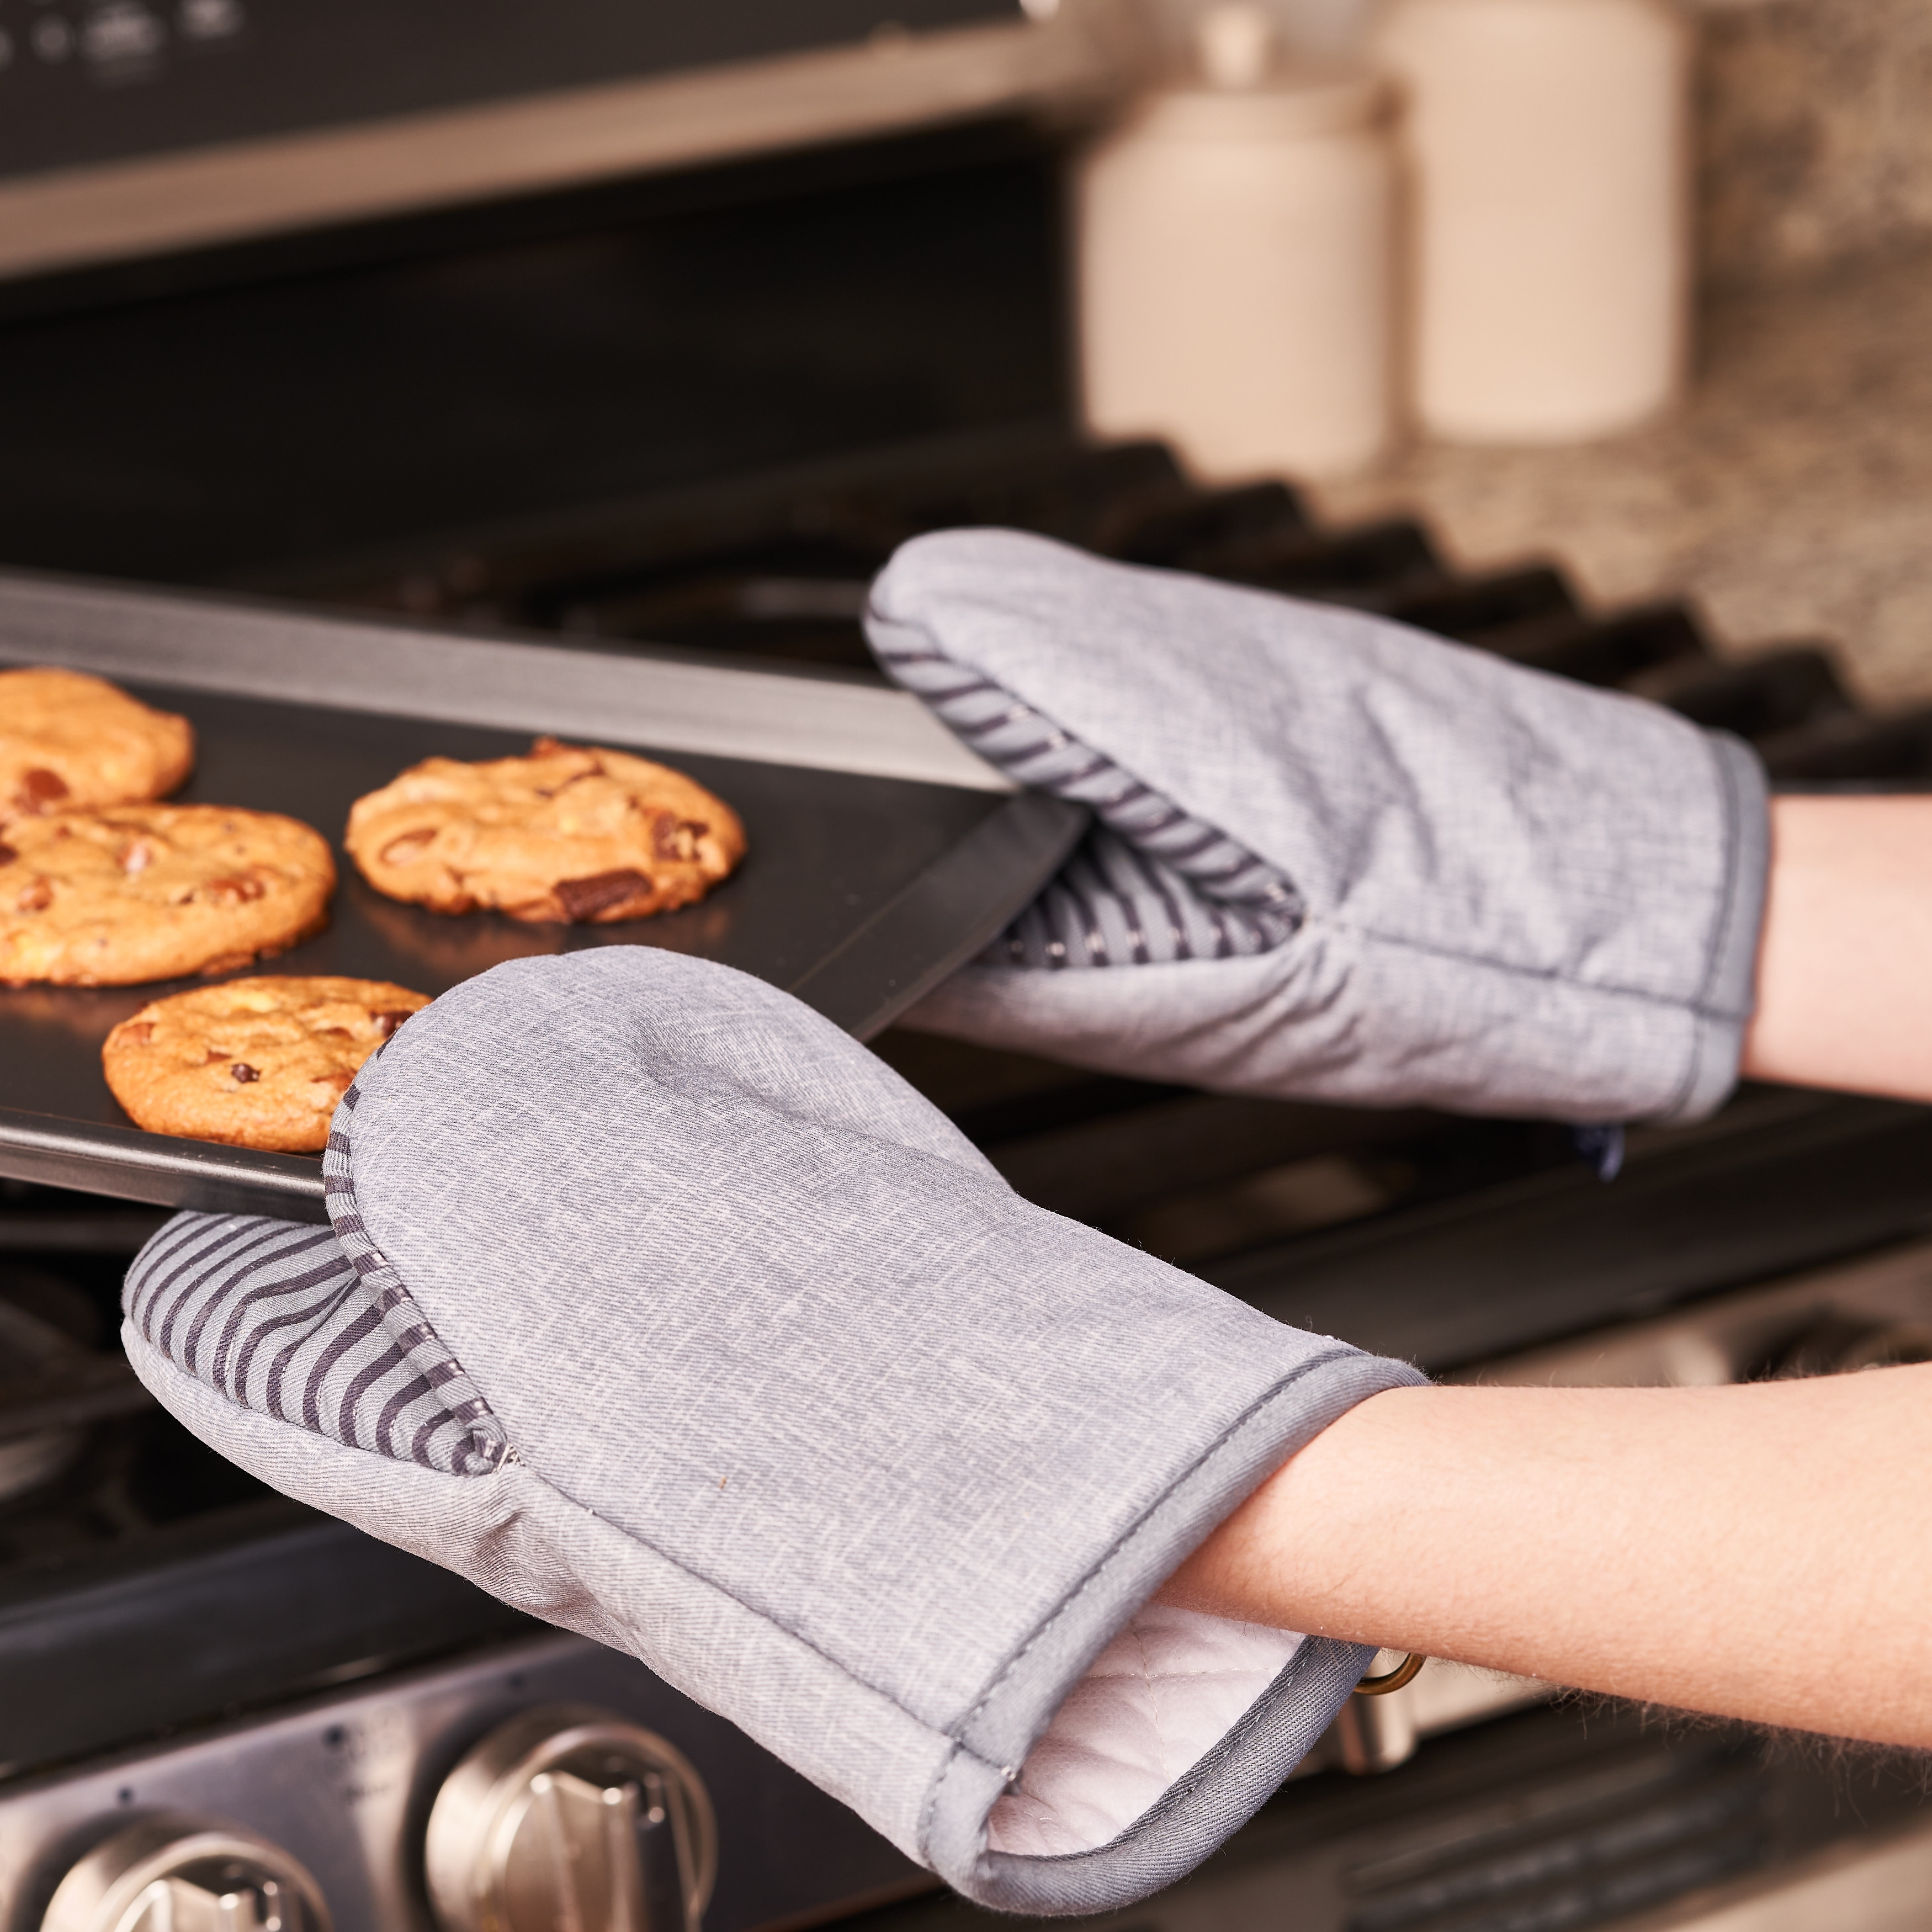 2 Pk 5x8 Quilted Heat Resistant Mini Oven Mitts - Misty Blue - One Size